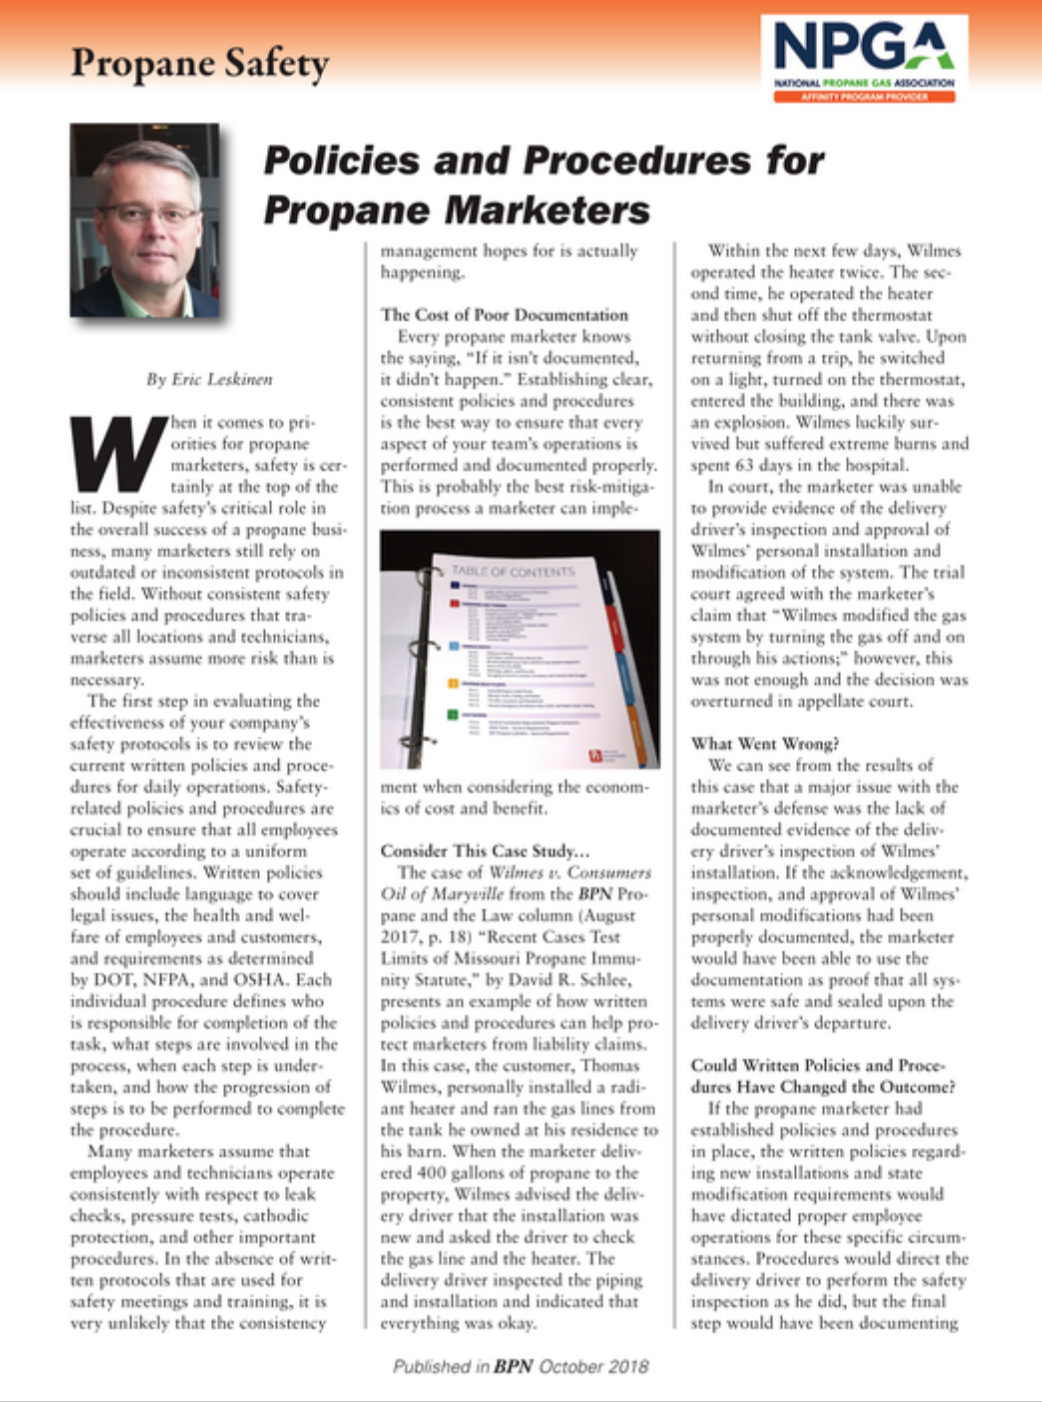 Policies and Procedures for Propane Marketers, BPN October 2018